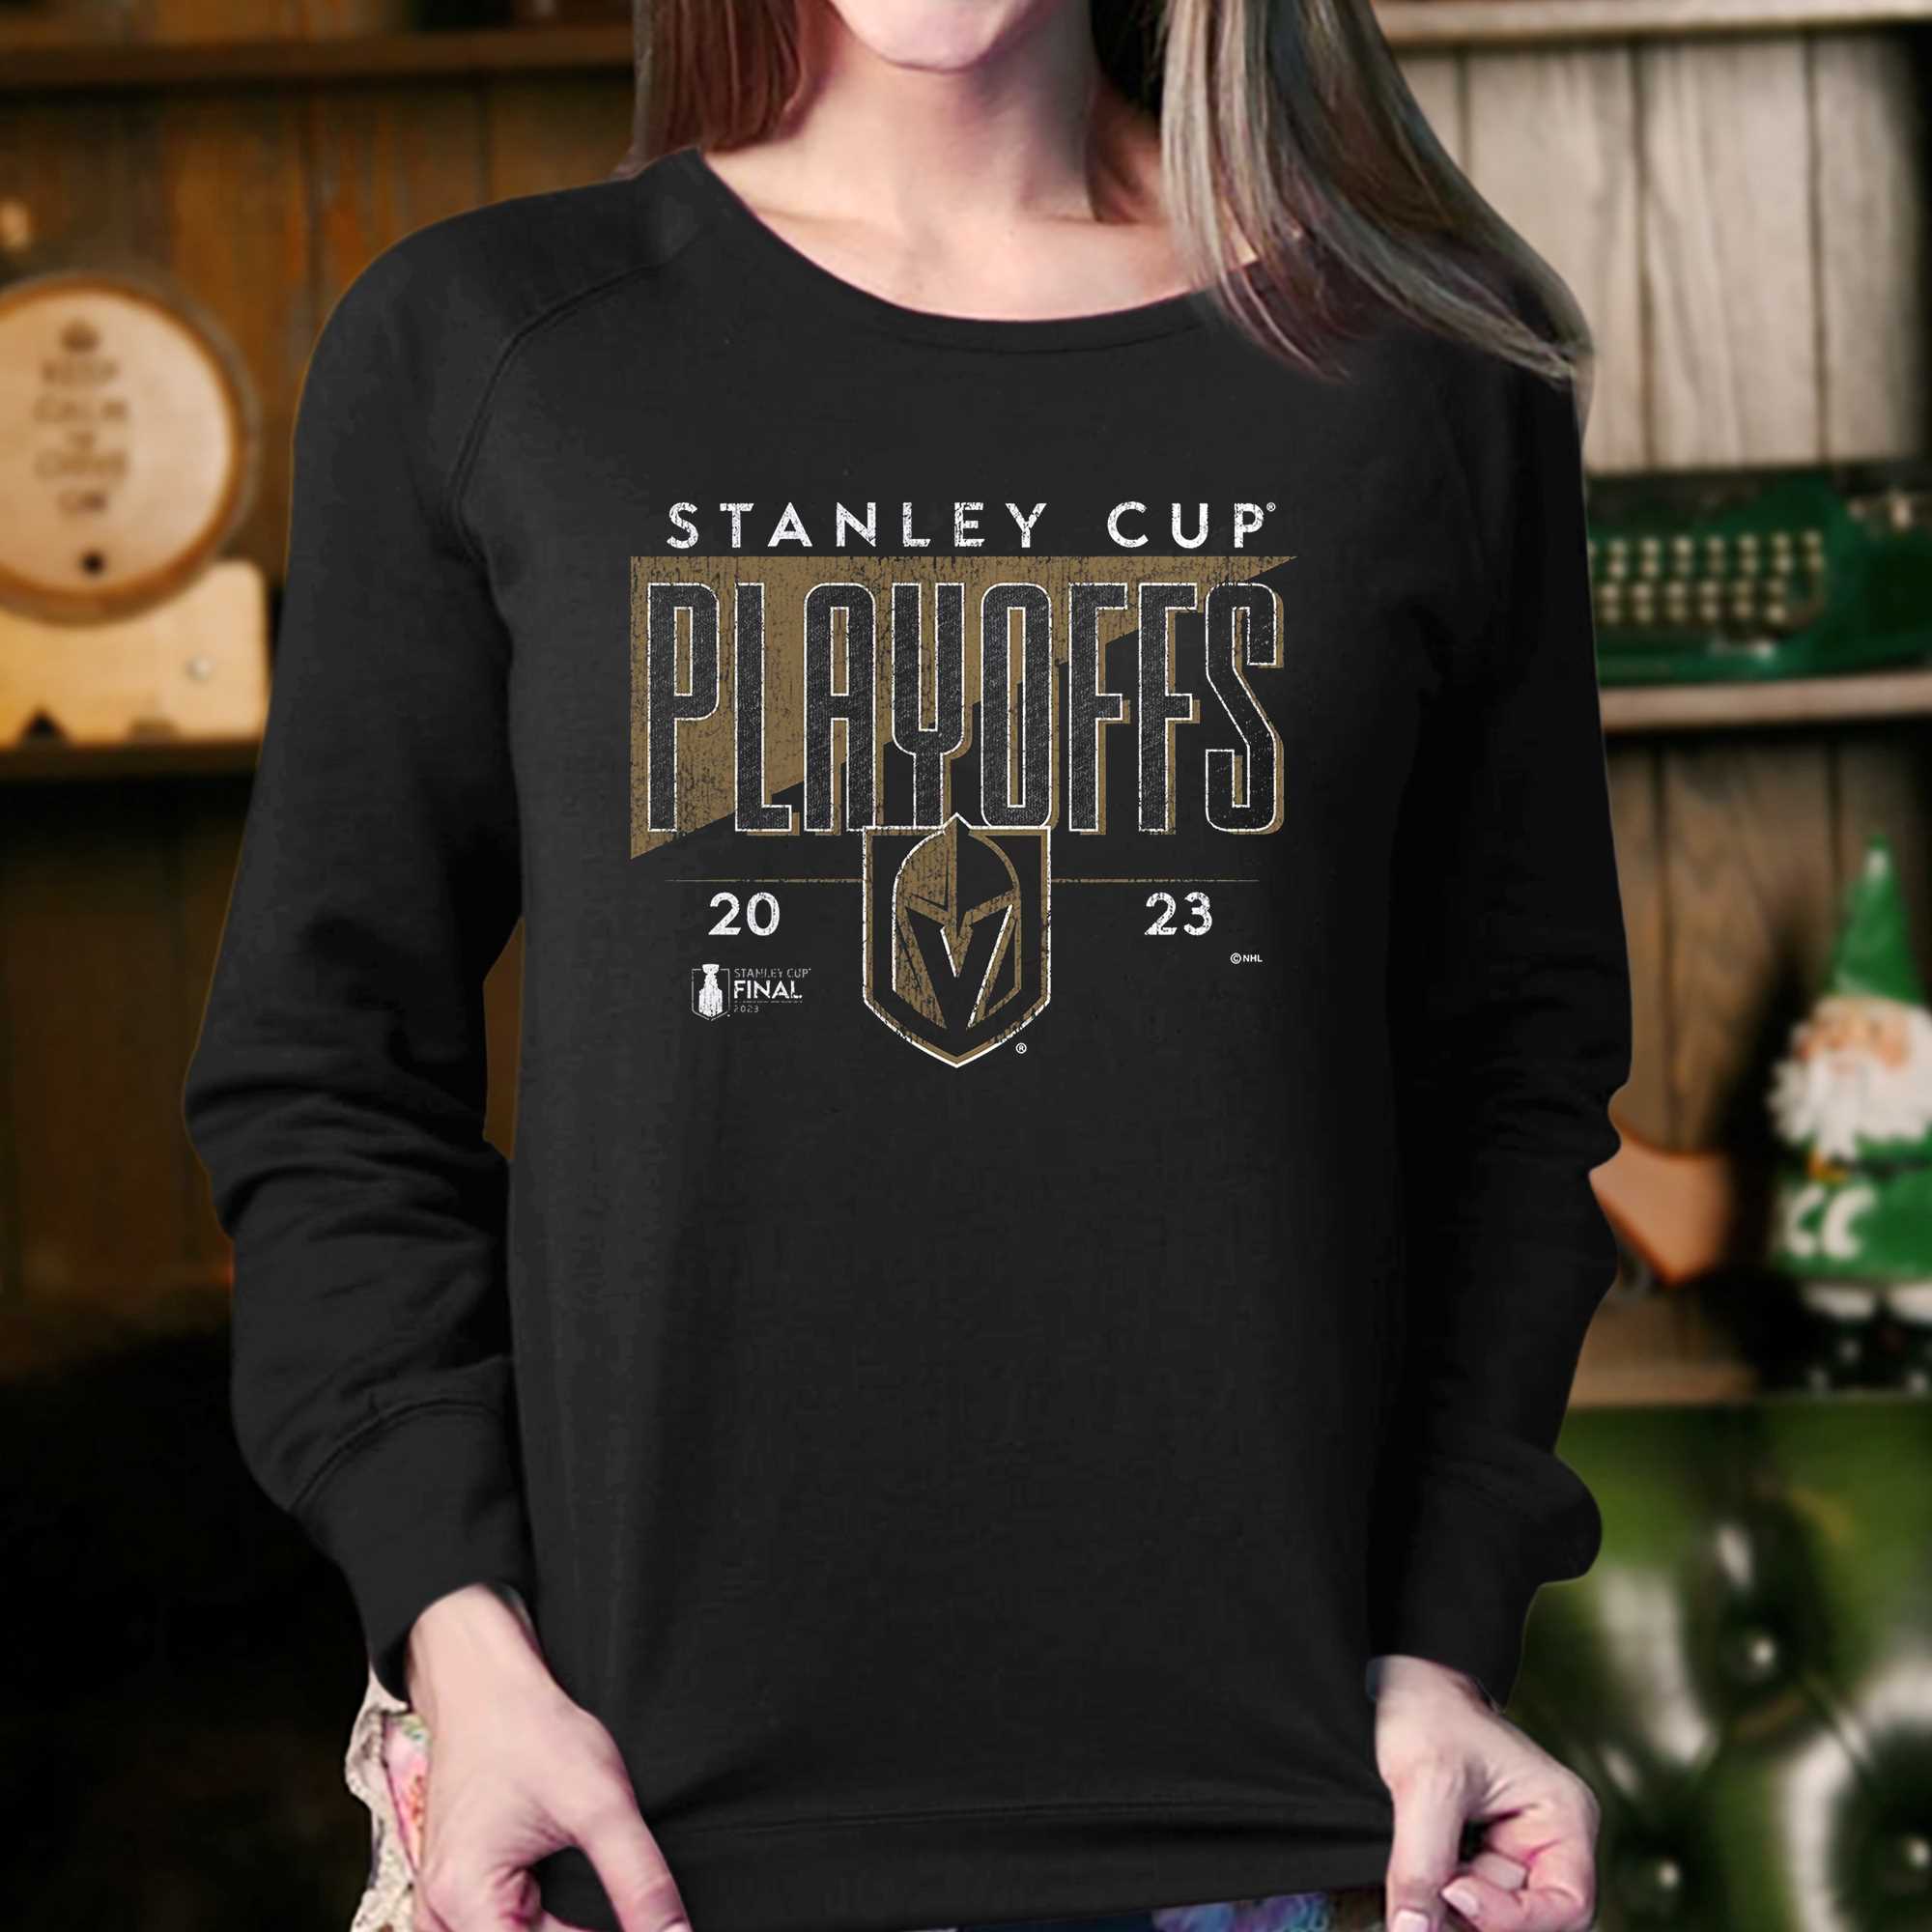 Official Vegas Golden Knights 2023 Stanley Cup Playoff Gear